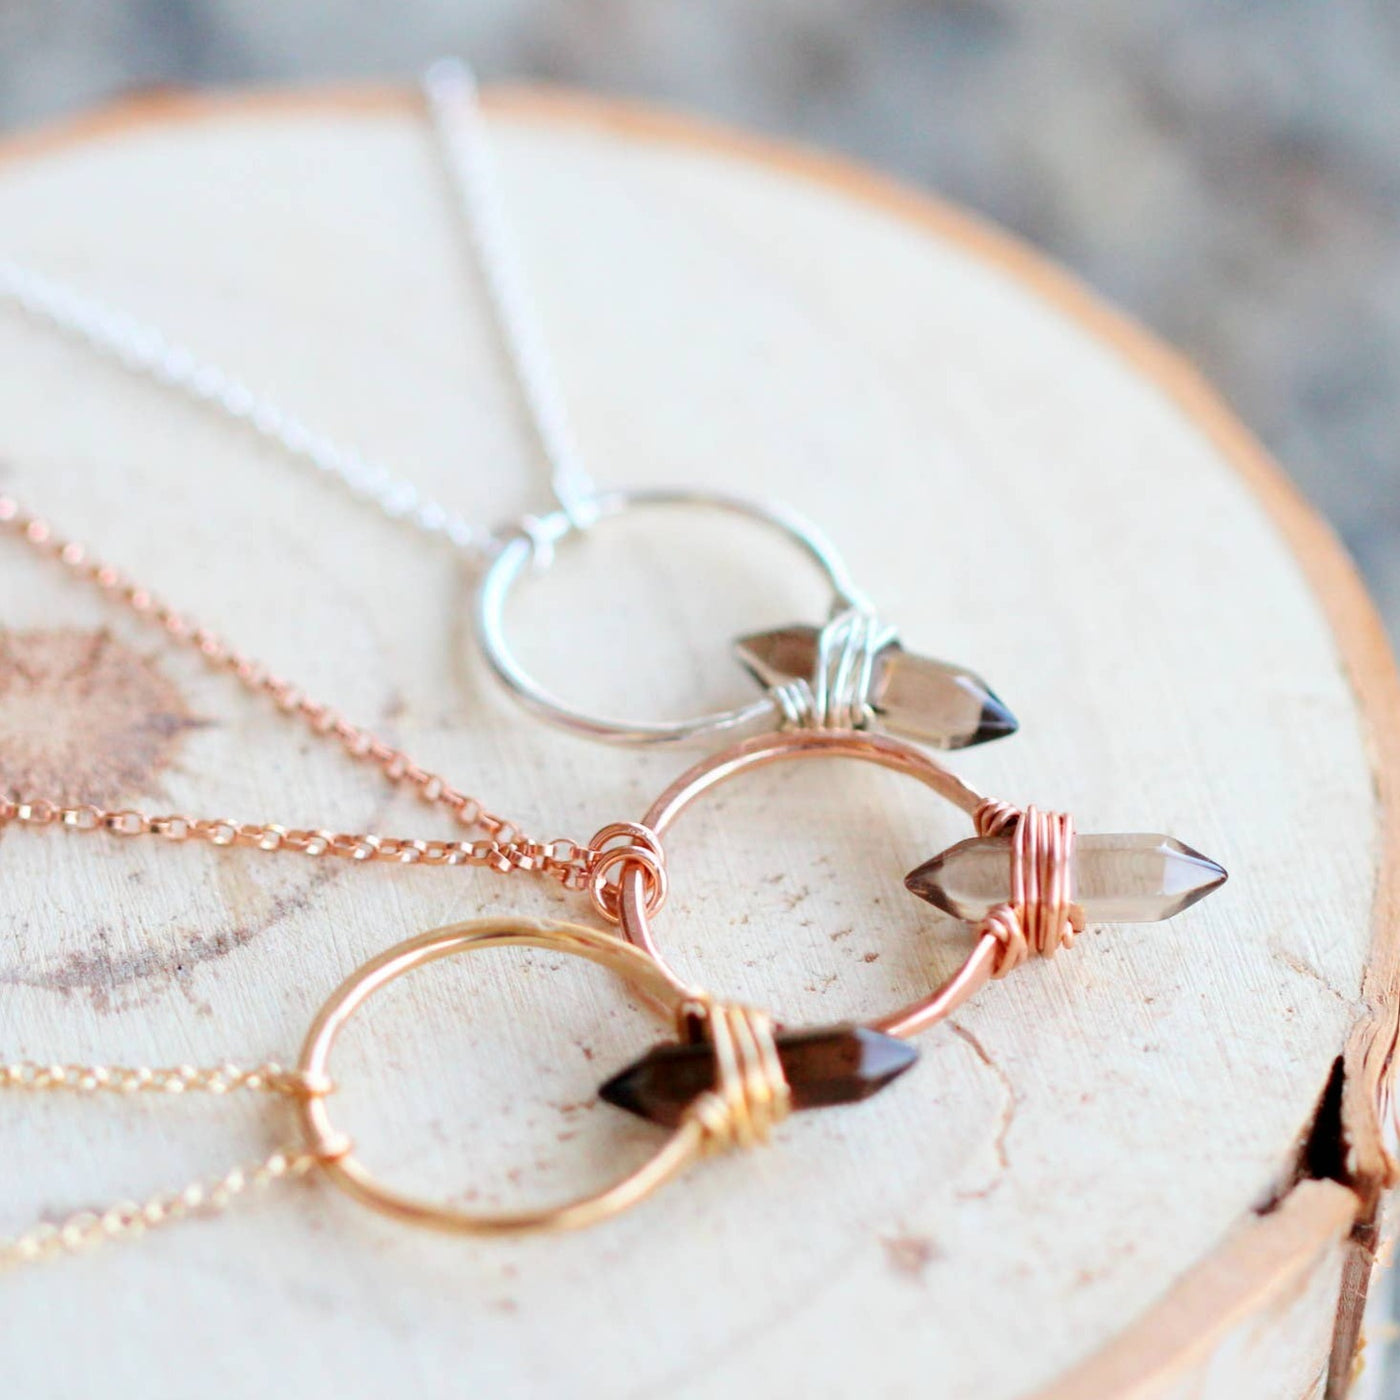 Several necklaces in silver, 14k gold and 14k rose gold with smokey quartz gemstone pendants